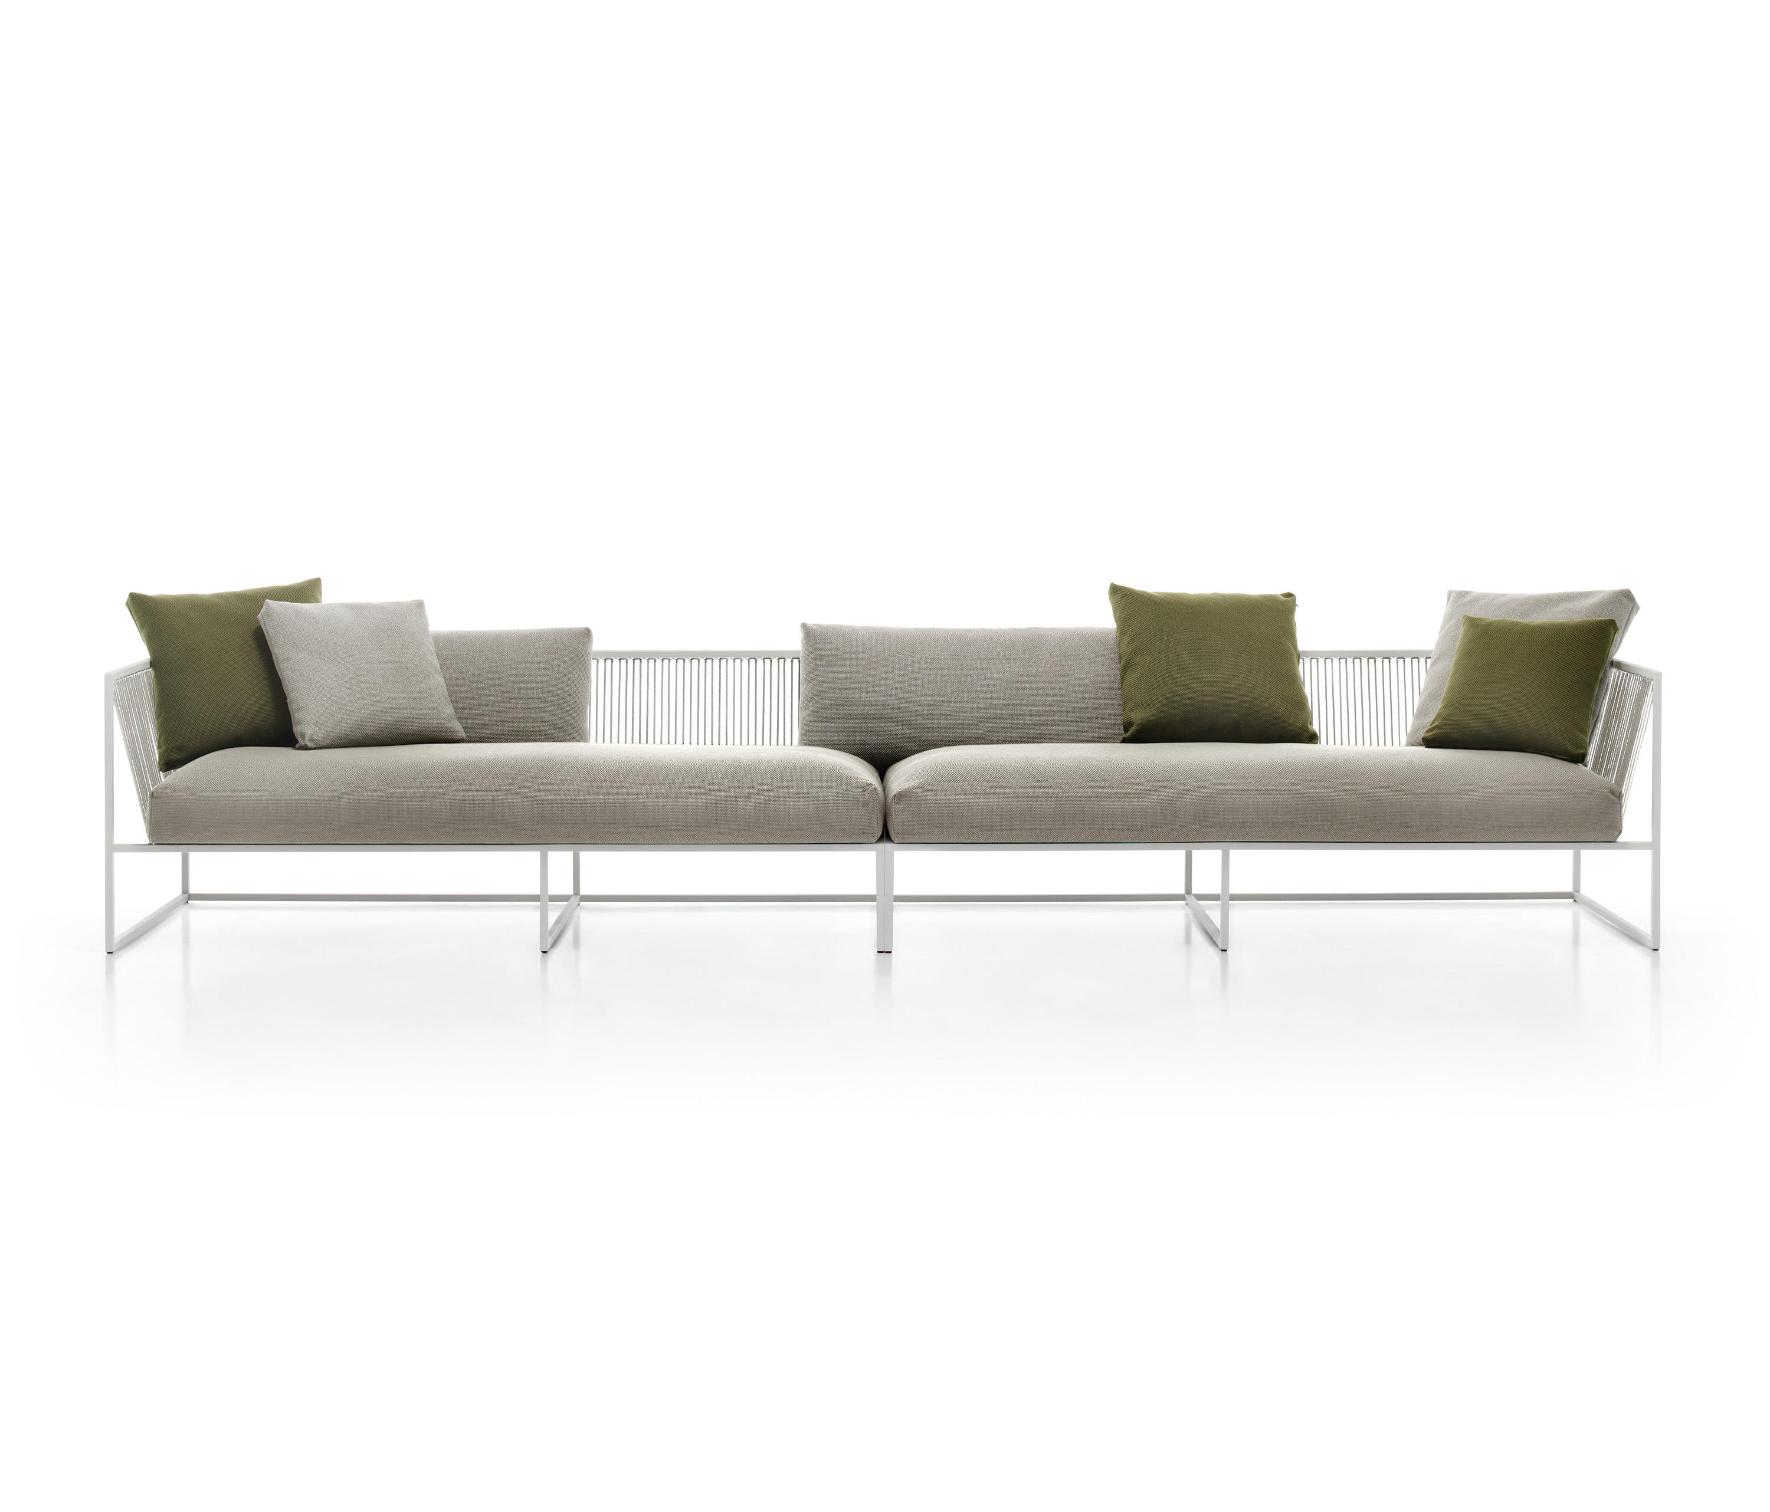 Arpa Light Outdoor Sectional Sofa